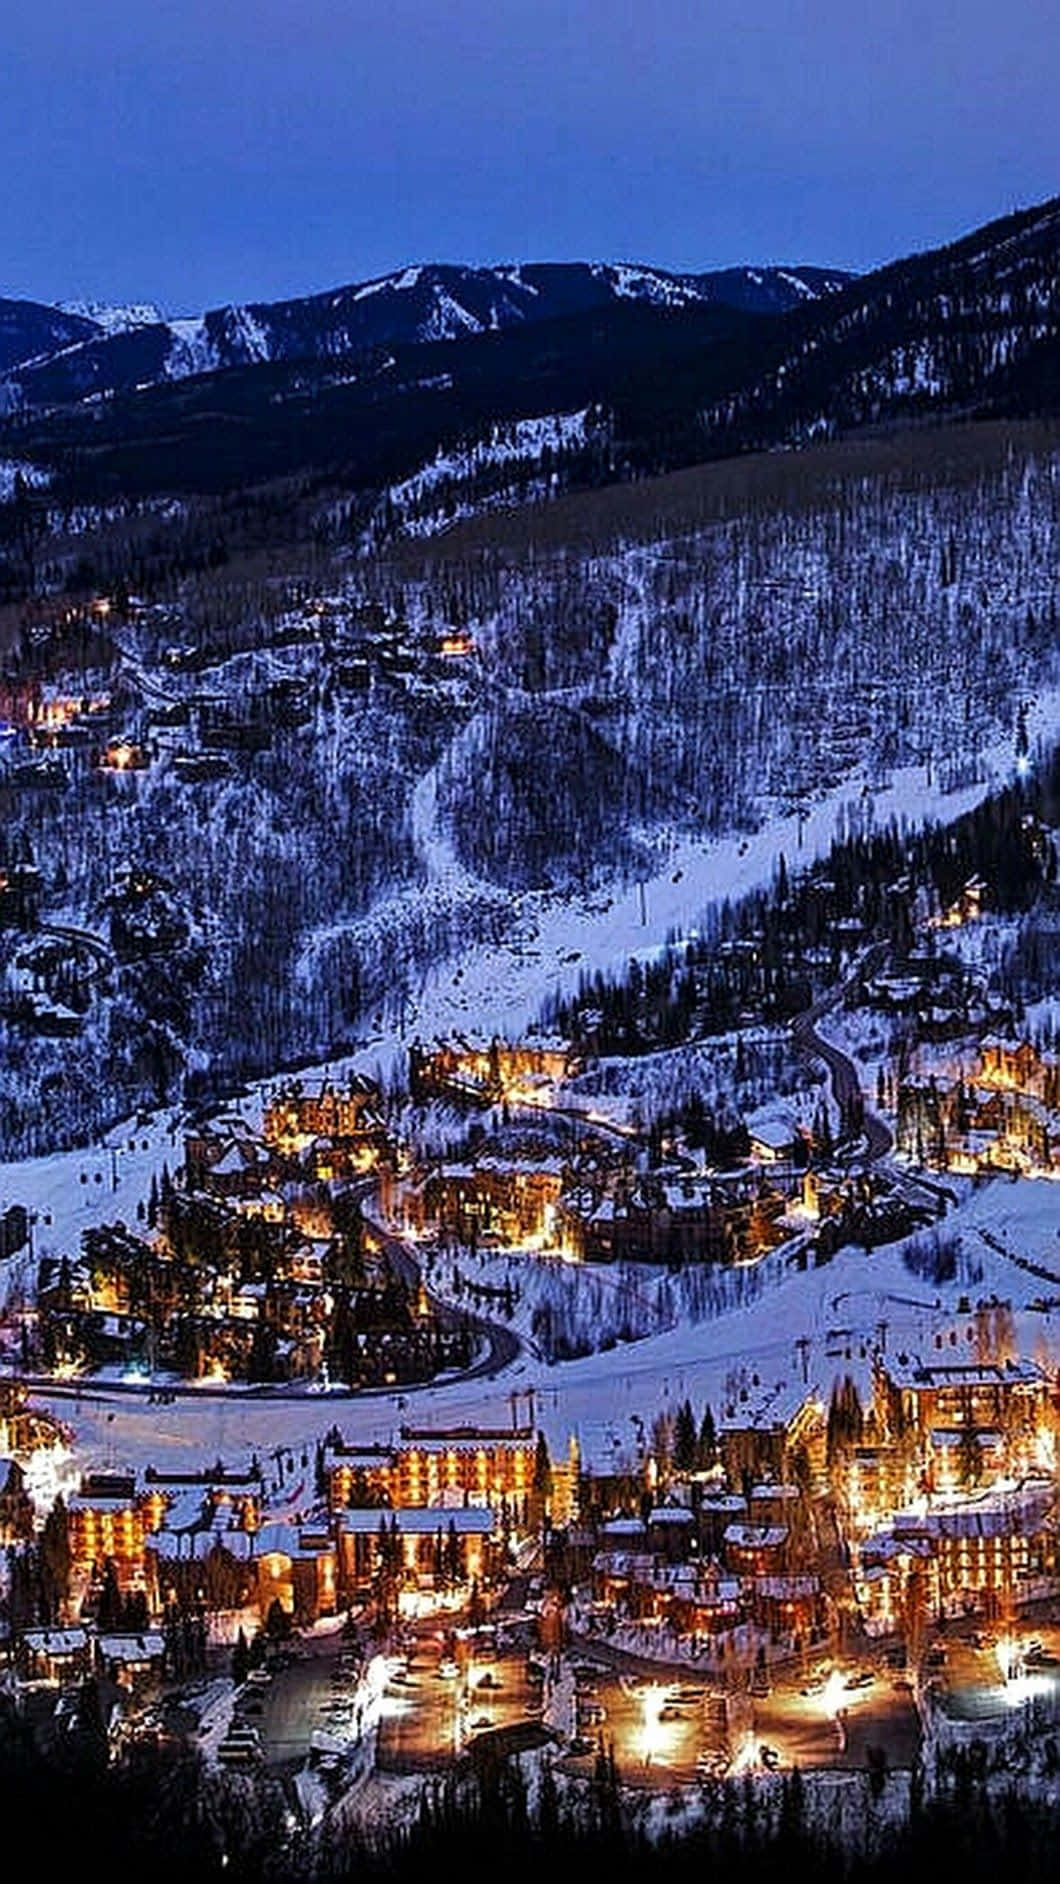 A Town Is Lit Up At Night With Snow On The Ground